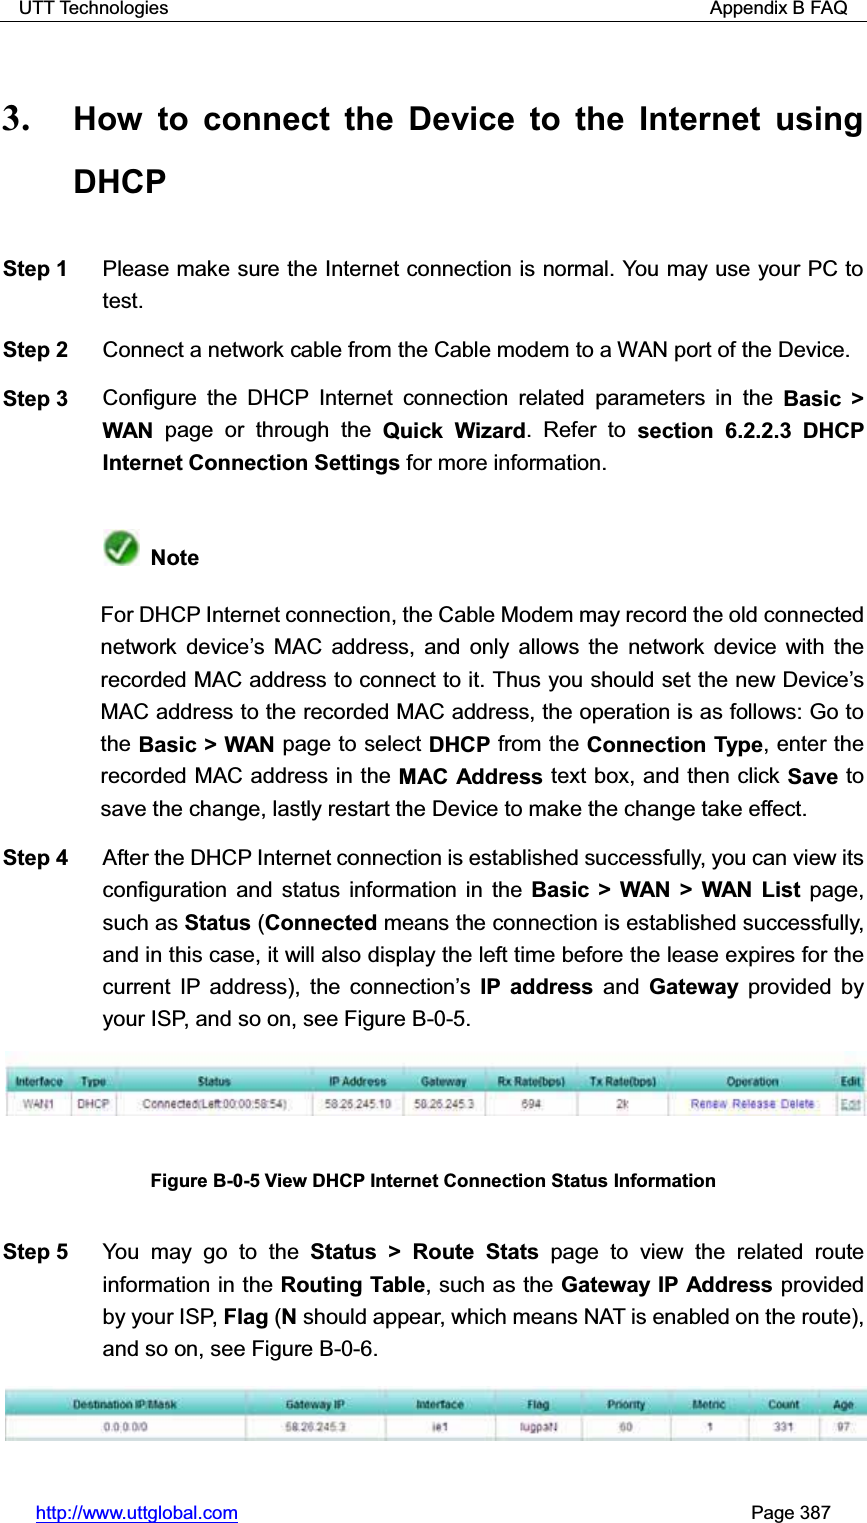 UTT Technologies                                                          Appendix B FAQ http://www.uttglobal.com                                                       Page 387 3. How to connect the Device to the Internet using DHCP Step 1  Please make sure the Internet connection is normal. You may use your PC to test. Step 2  Connect a network cable from the Cable modem to a WAN port of the Device. Step 3  Configure the DHCP Internet connection related parameters in the Basic &gt; WAN  page or through the Quick Wizard. Refer to section 6.2.2.3 DHCP Internet Connection Settings for more information. NoteFor DHCP Internet connection, the Cable Modem may record the old connected network device¶s MAC address, and only allows the network device with the recorded MAC address to connect to it. Thus you should set the new Device¶sMAC address to the recorded MAC address, the operation is as follows: Go to the Basic &gt; WAN page to select DHCP from the Connection Type, enter the recorded MAC address in the MAC Address text box, and then click Save to save the change, lastly restart the Device to make the change take effect. Step 4  After the DHCP Internet connection is established successfully, you can view its configuration and status information in the Basic &gt; WAN &gt; WAN List page, such as Status (Connected means the connection is established successfully, and in this case, it will also display the left time before the lease expires for the current IP address), the connection¶sIP address and Gateway provided by your ISP, and so on, see Figure B-0-5. Figure B-0-5 View DHCP Internet Connection Status Information Step 5  You may go to the Status &gt; Route Stats page to view the related route information in the Routing Table, such as the Gateway IP Address provided by your ISP, Flag (N should appear, which means NAT is enabled on the route), and so on, see Figure B-0-6. 